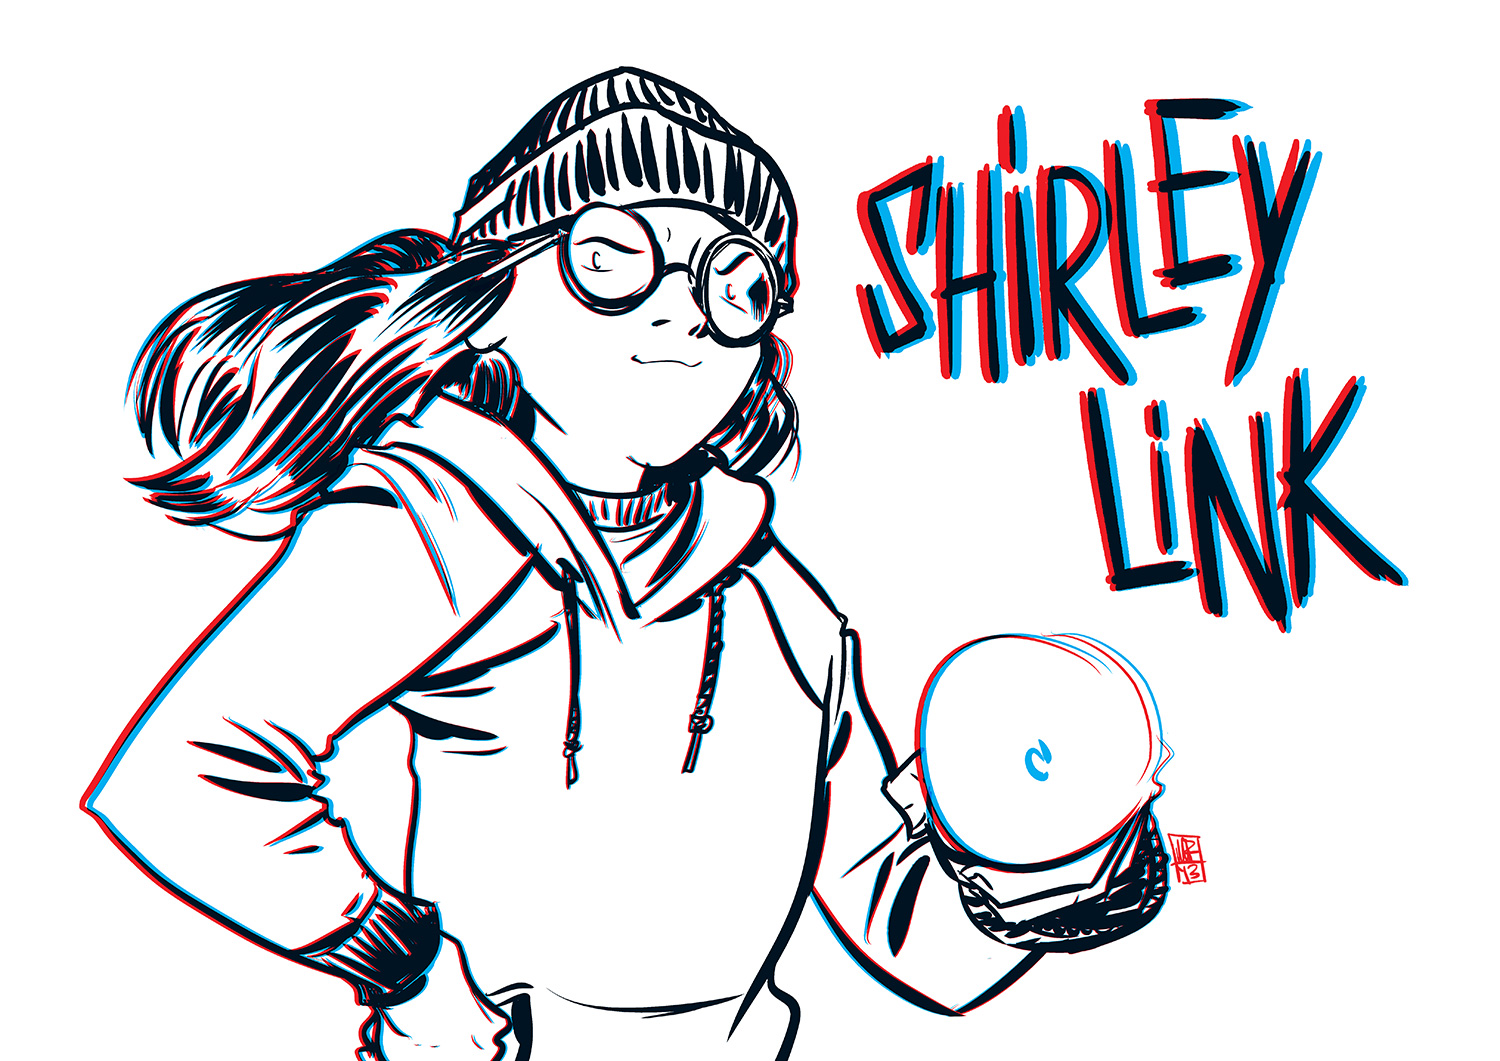 Shirley Link in 3D!